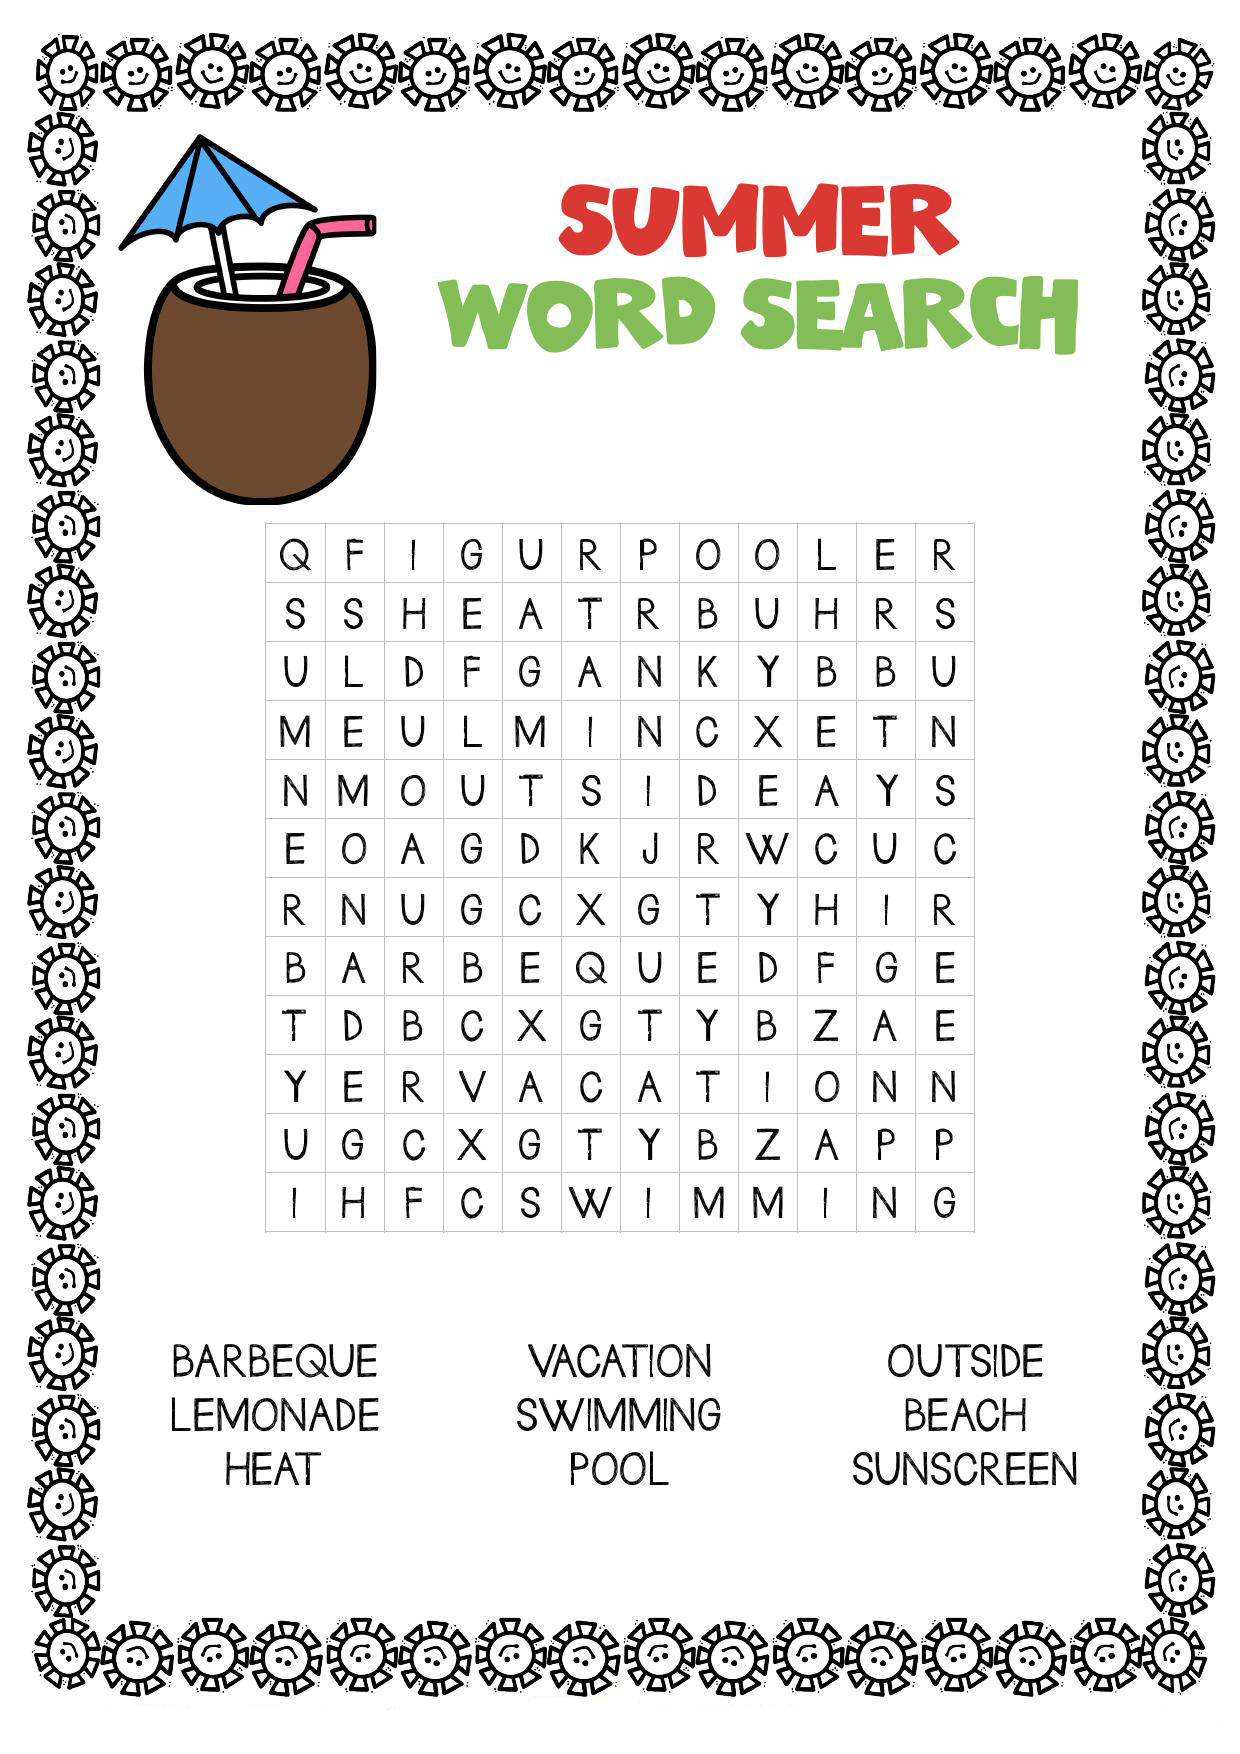 Printable Cat Word Searches